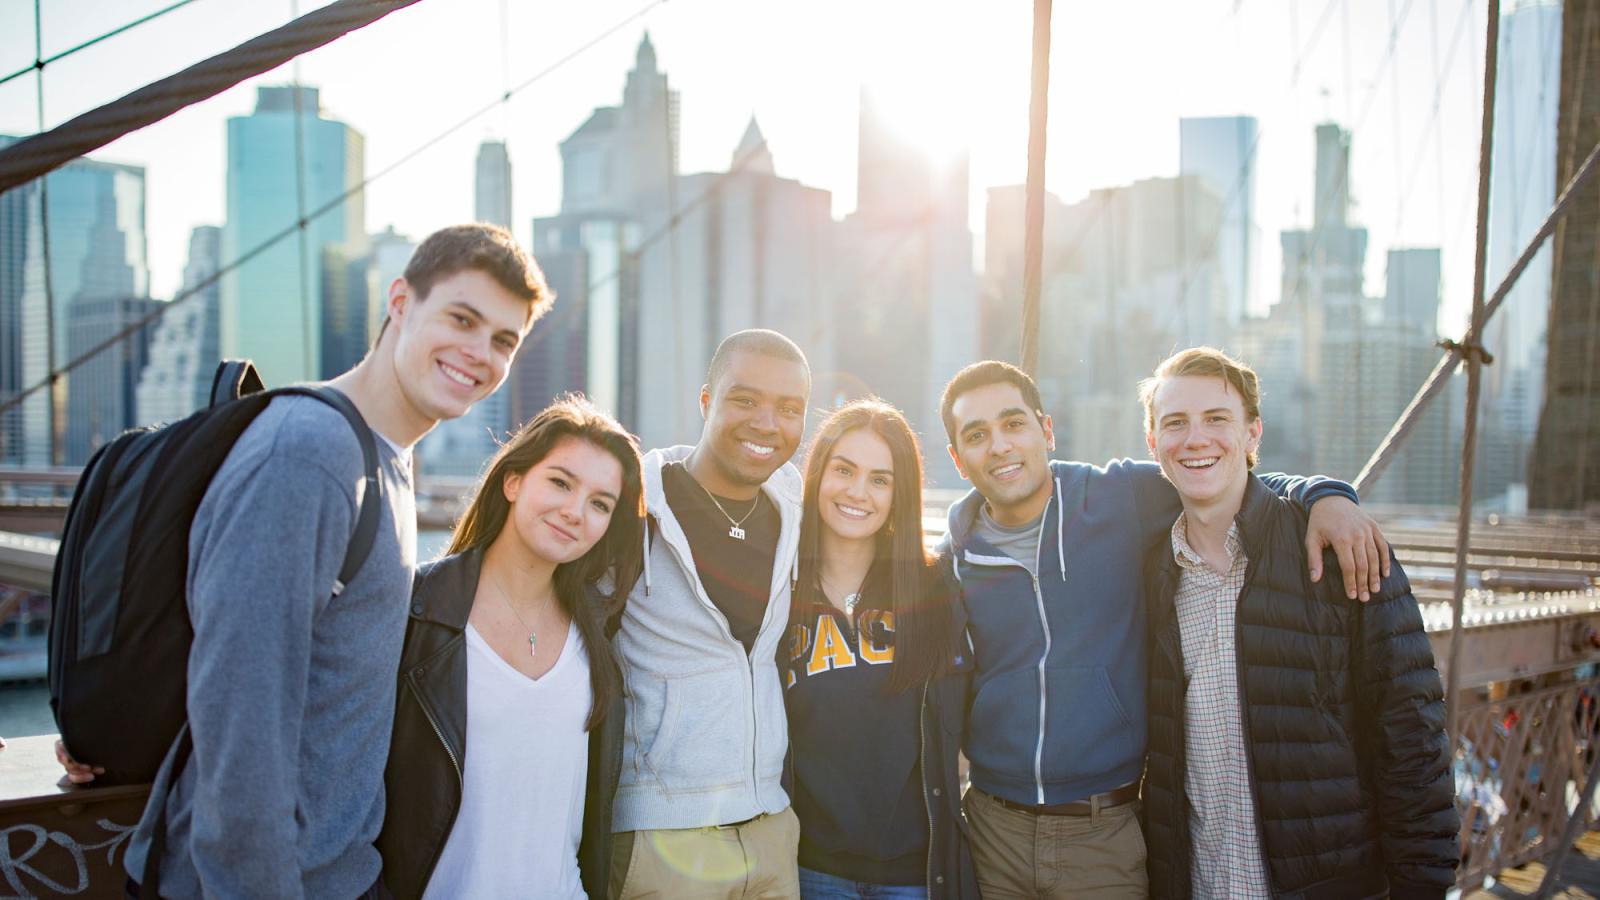 Pace University Lubin Students standing on the Brooklyn Bridge in front of the New York City skyline